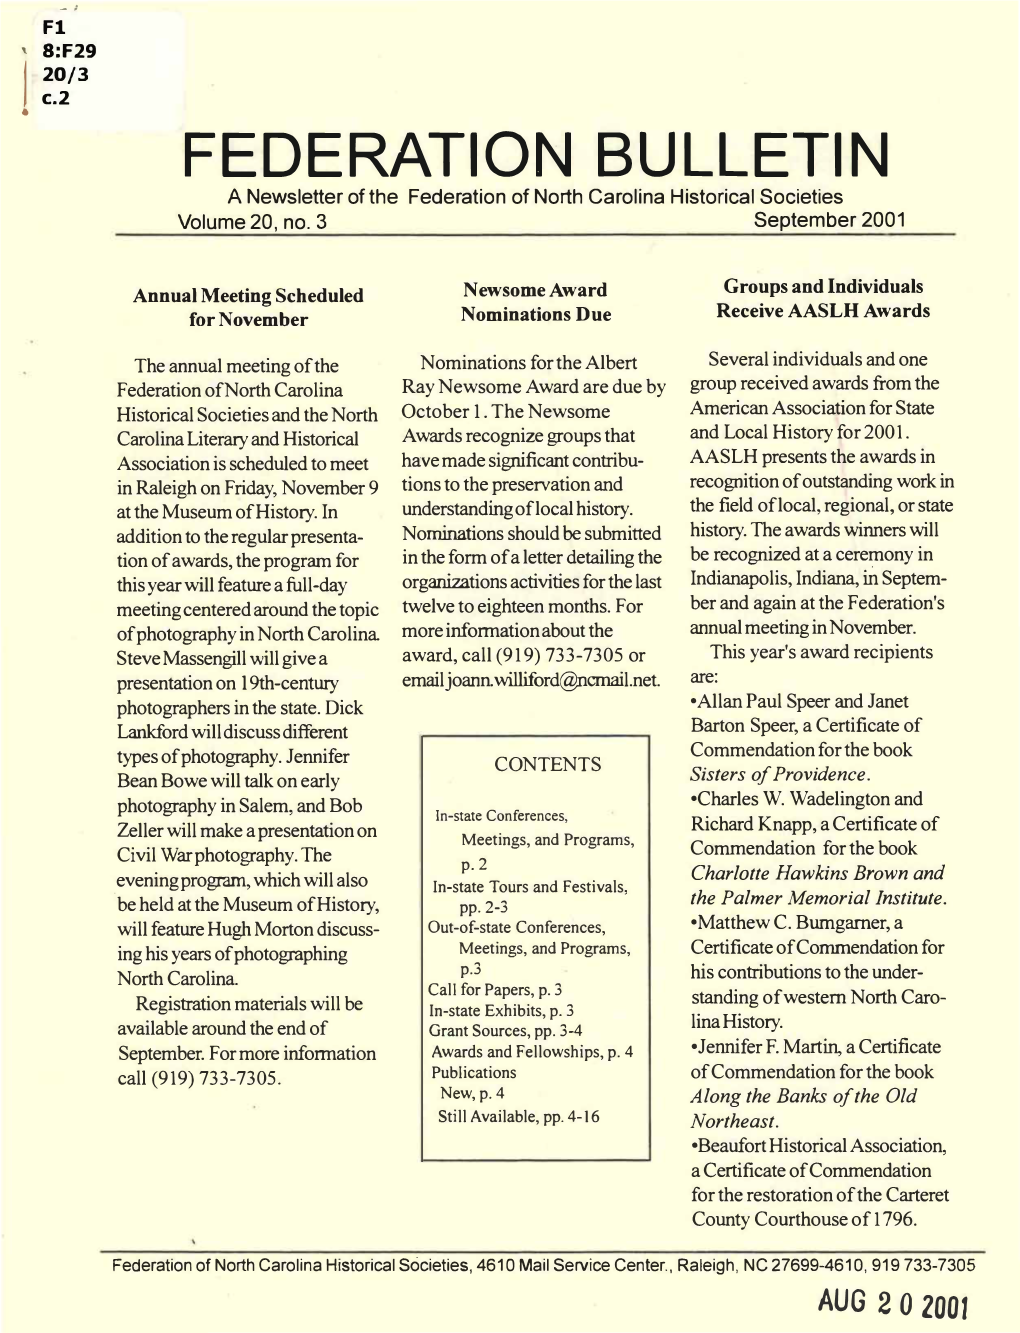 FEDERATION BULLETIN a Newsletter of the Federation of Northcarolina Historical Societies Volume 20, No